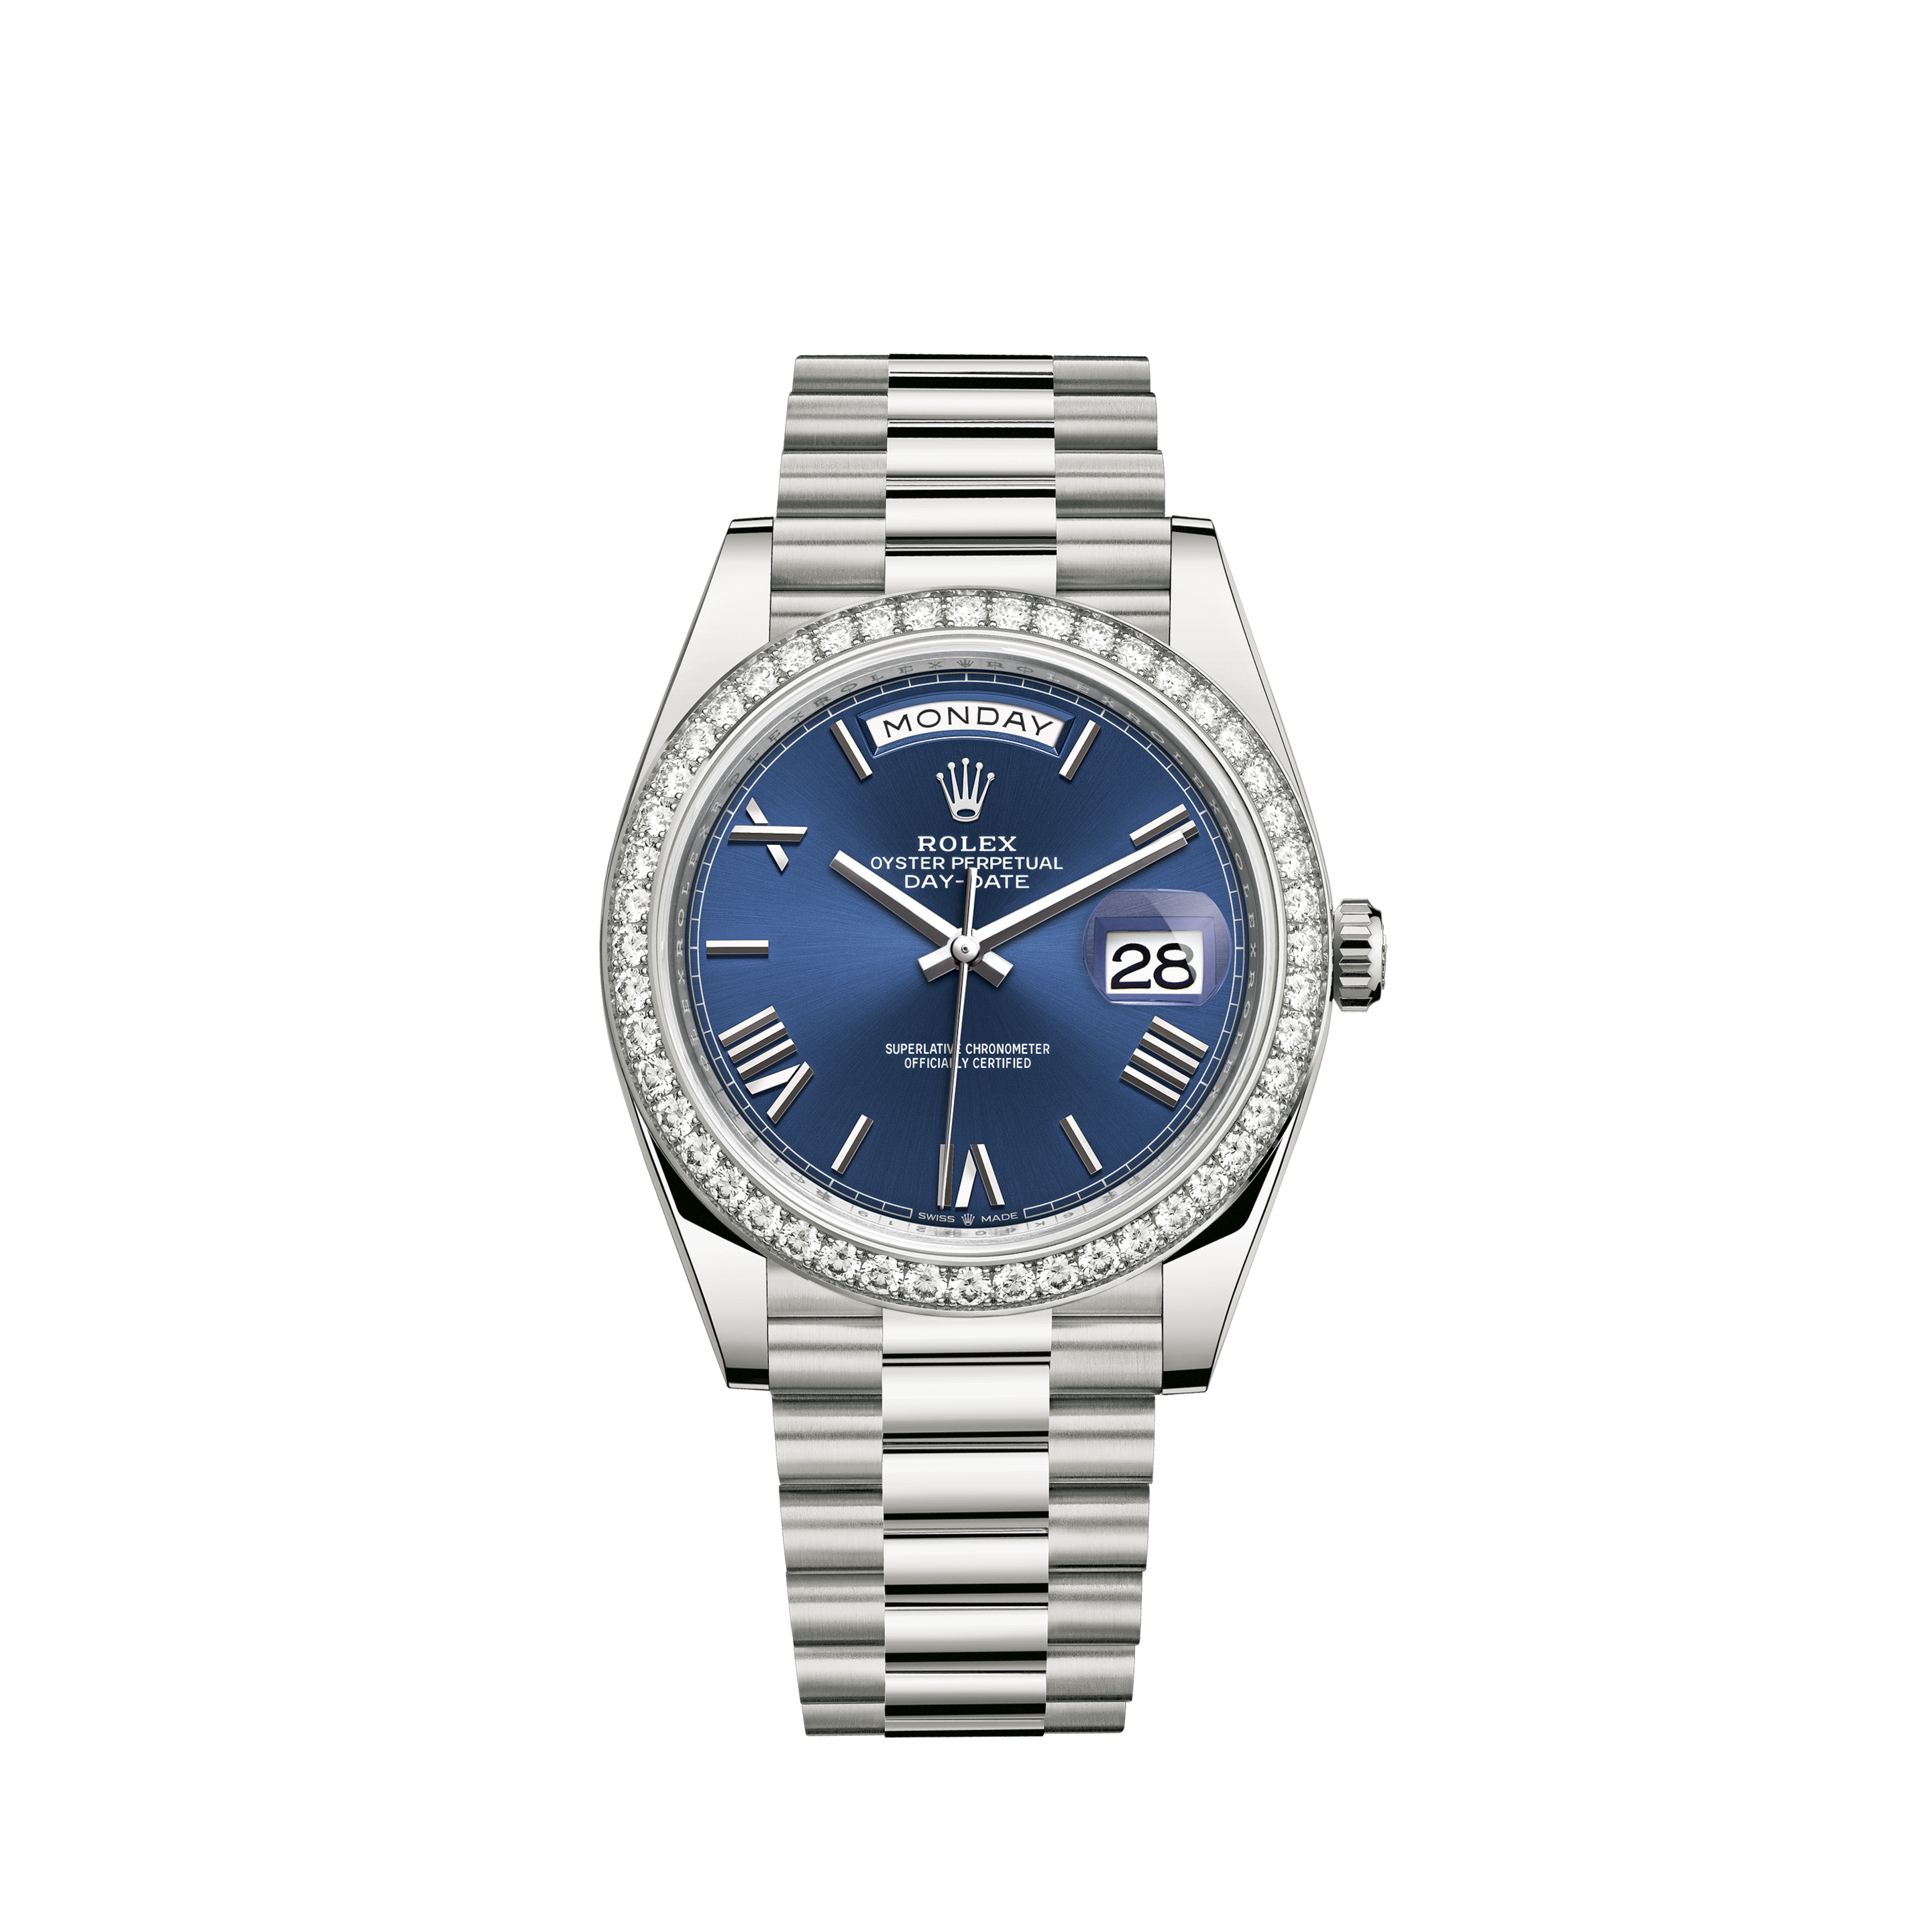 Rolex New Datejust 36mm 116200 Stainless Steel Blue 2019 Box/Paper/WTY #RL445Rolex New Datejust 36mm 116200 Stainless Steel Silver 2019 Box/Paper/WTY #RL430